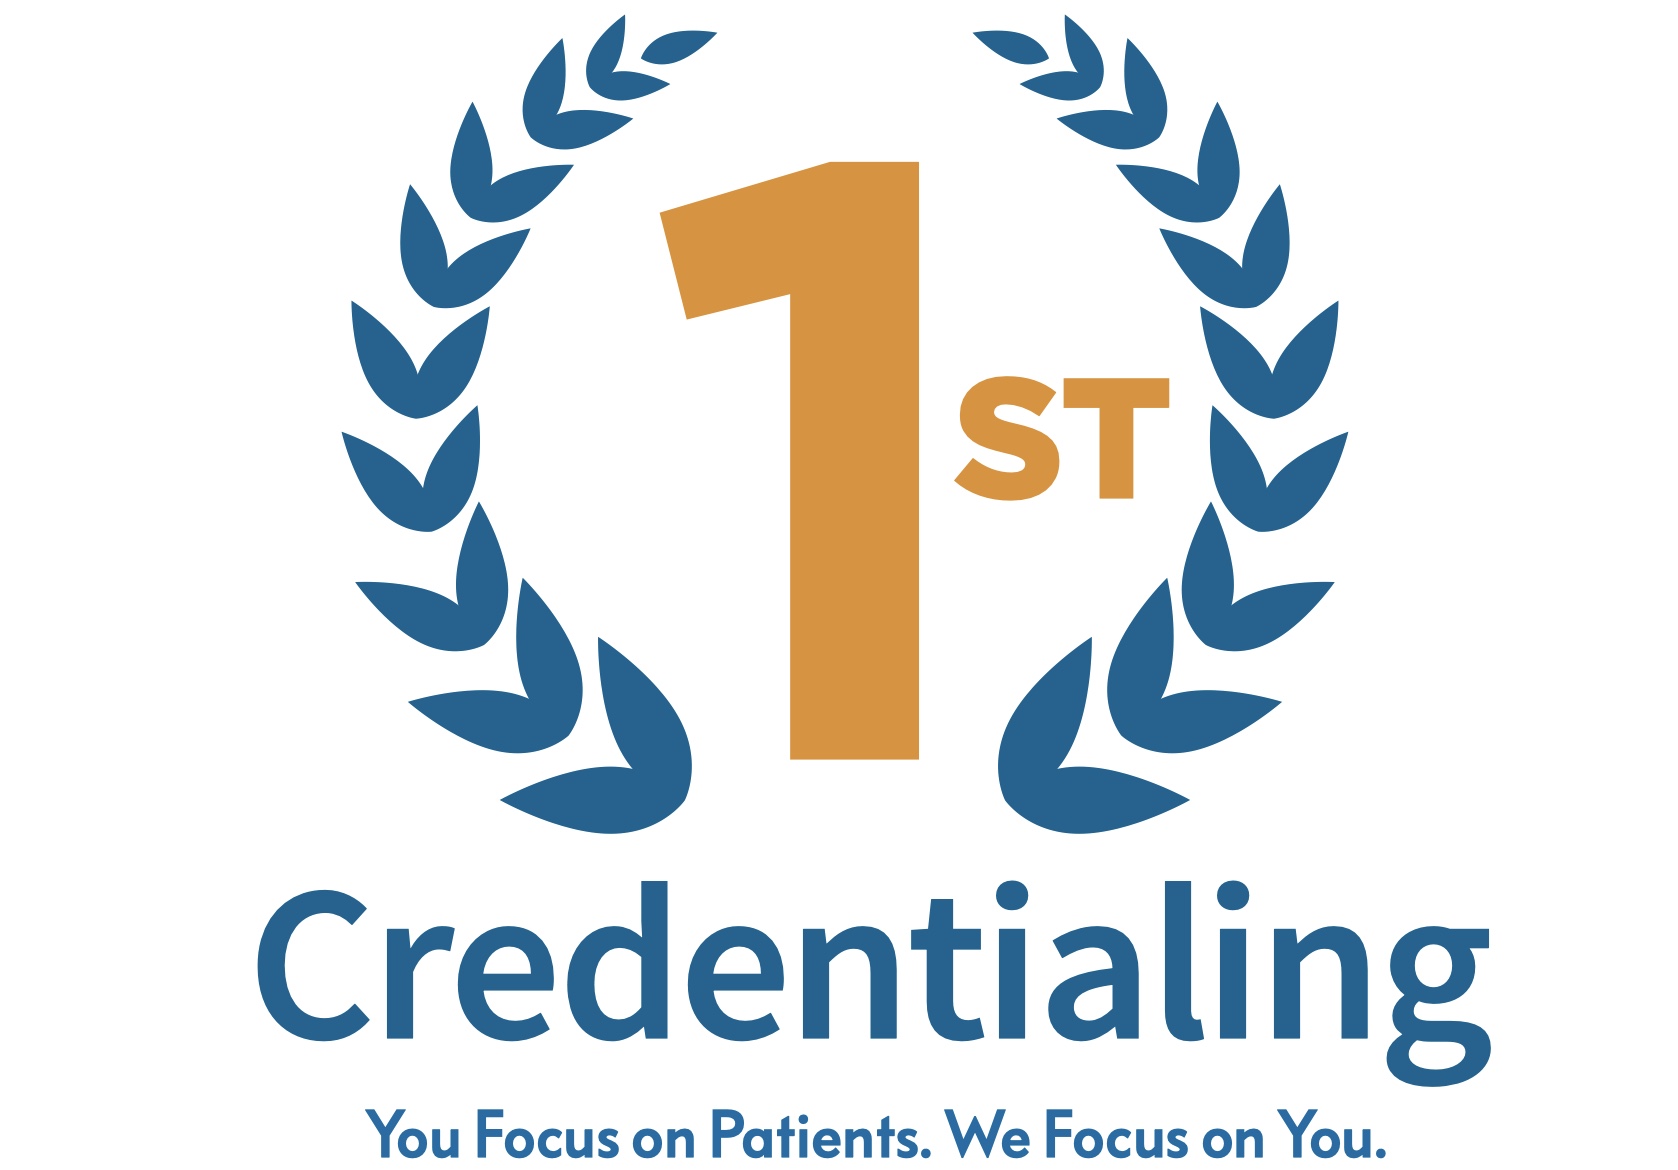 1st Credentialing